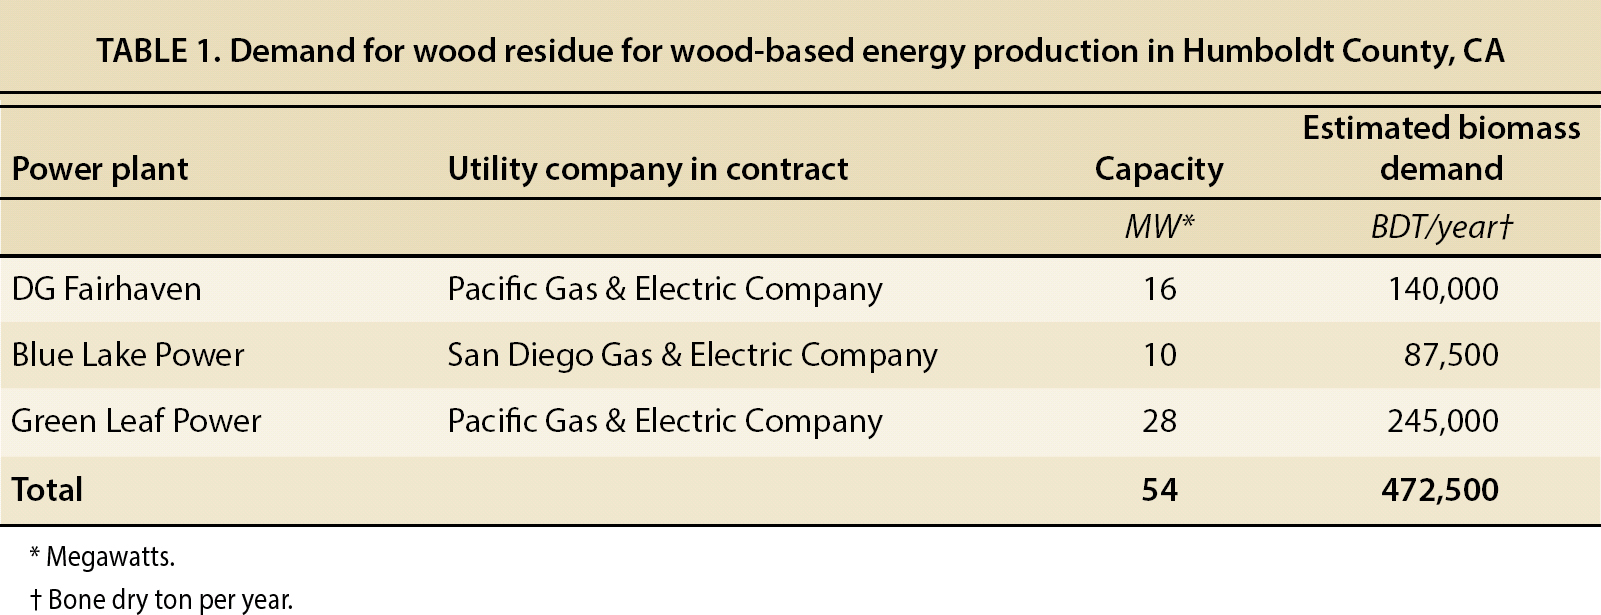 Demand for wood residue for wood-based energy production in Humboldt County, CA